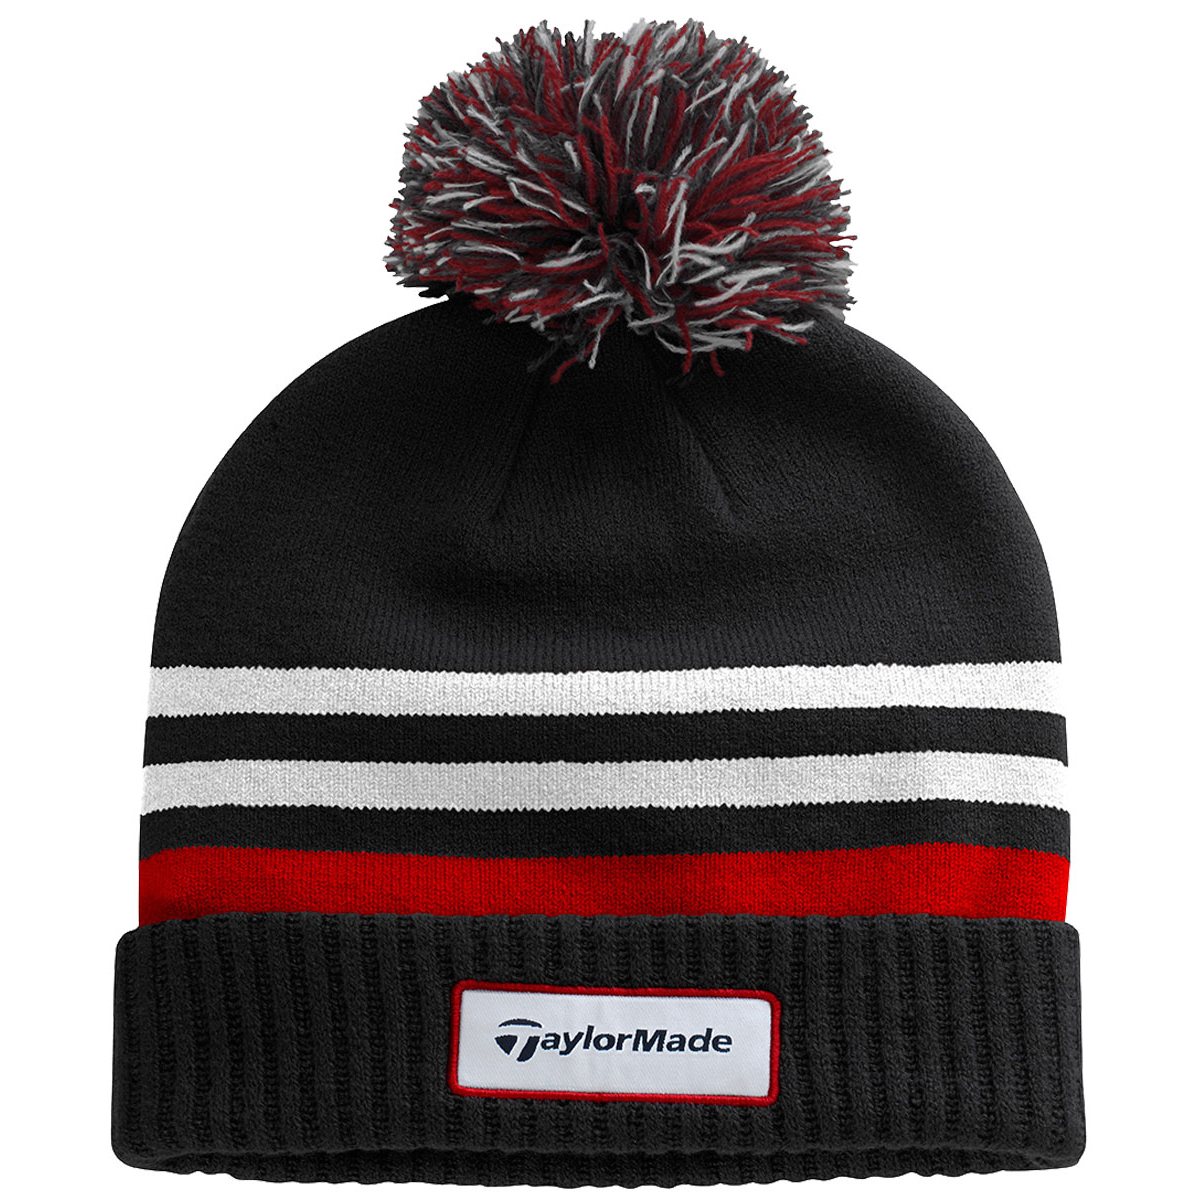 TaylorMade Bobble Beanie from american golf